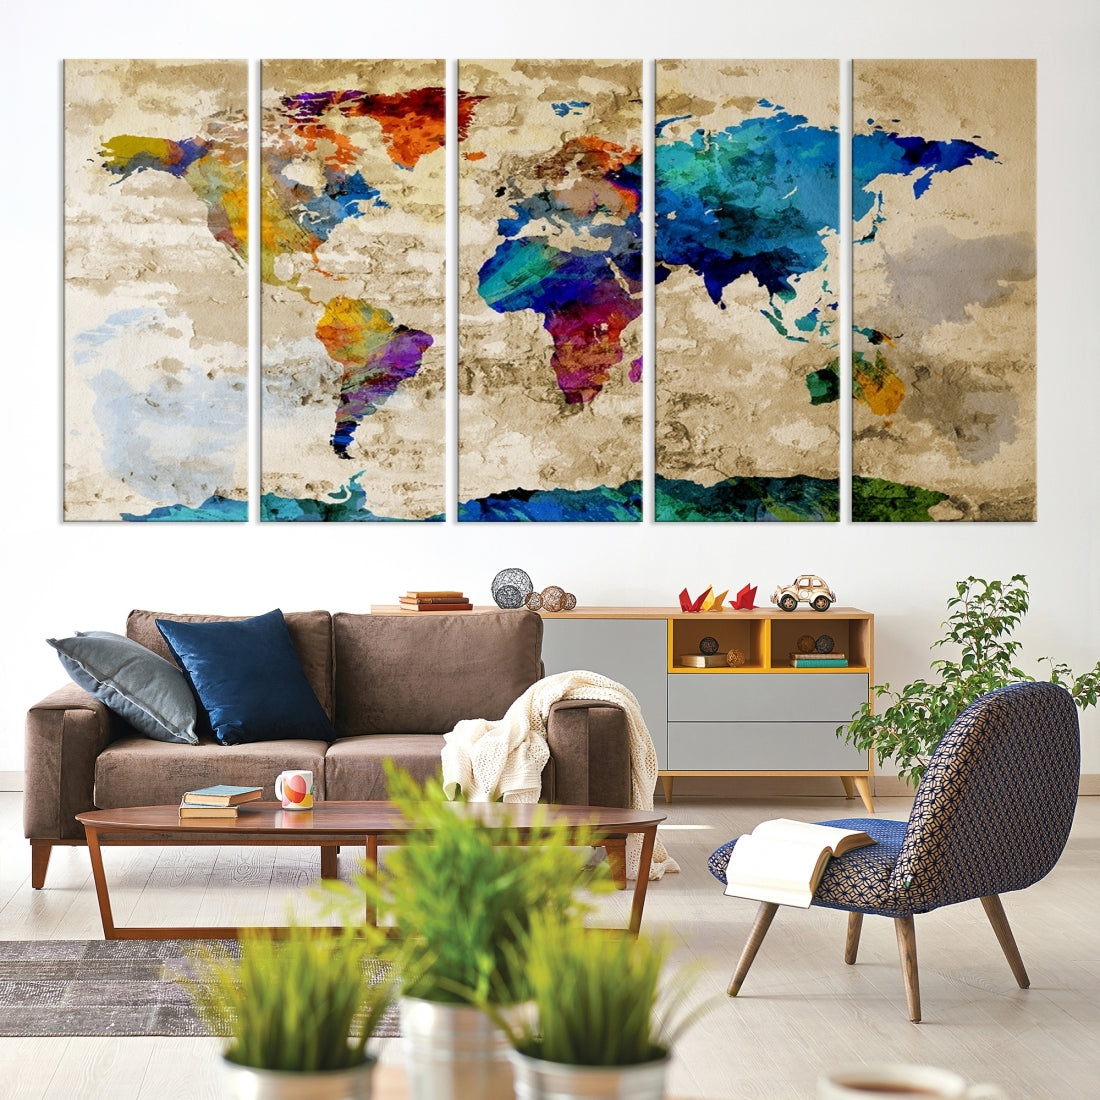 Watercolor World Map Canvas Print Large World Map Wall Art Great Design Great Gift Idea